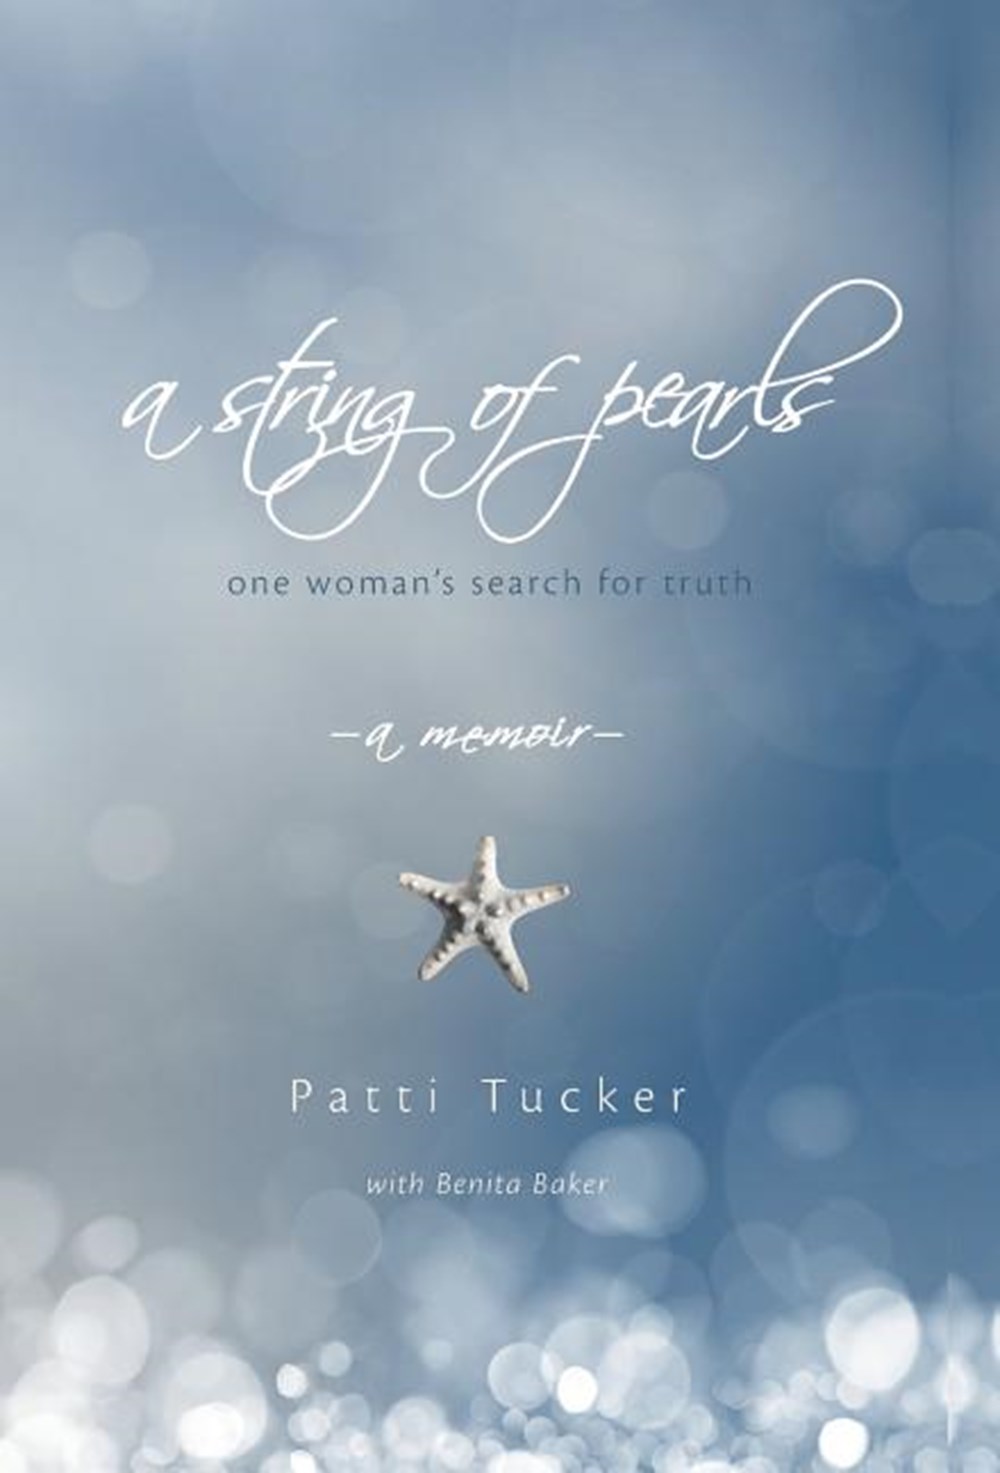 String of Pearls: One Woman's Search for Truth